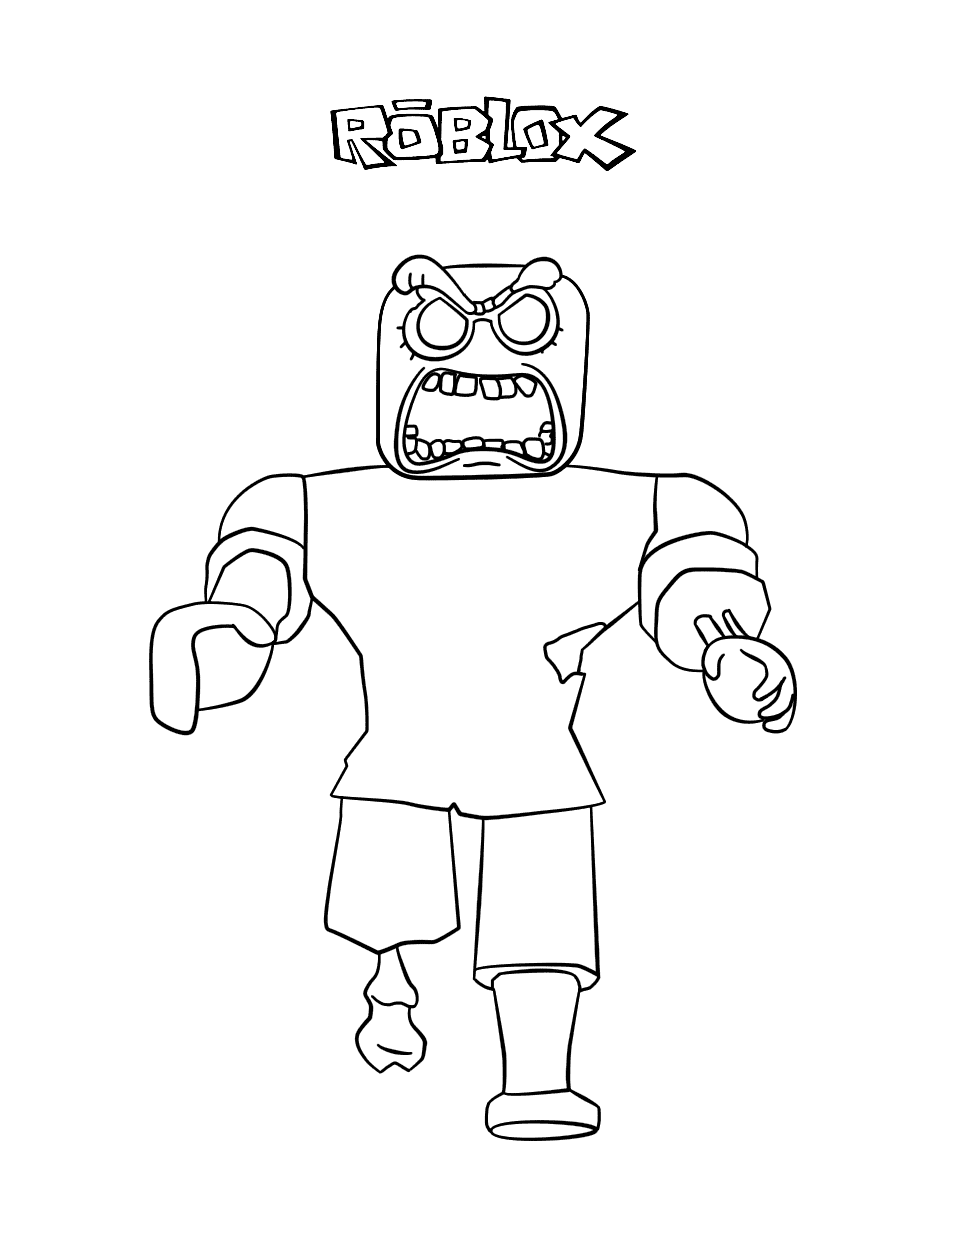 The Roblox Zombie Shows Its Teeth